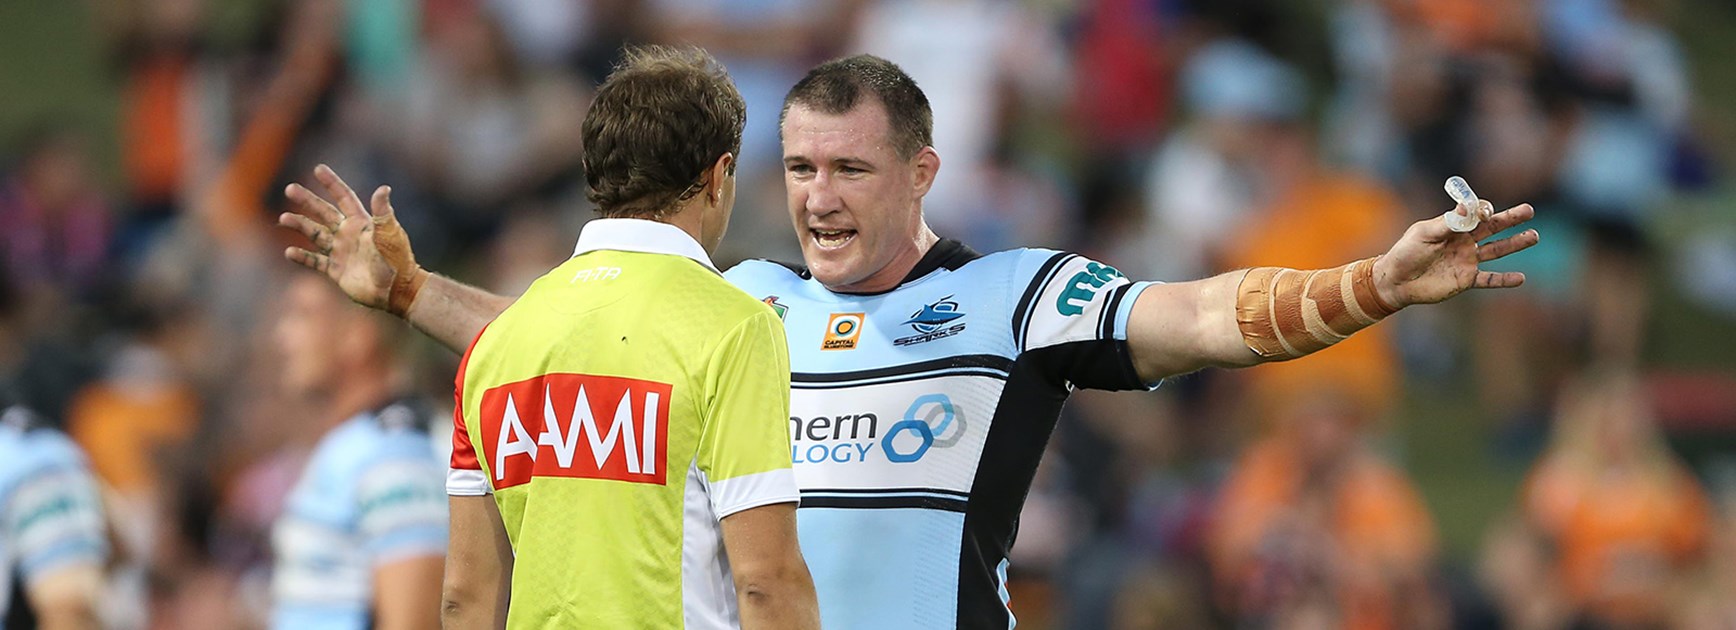 Sharks captain Paul Gallen remonstrates with the referee in the Round 5 game against Wests Tigers.